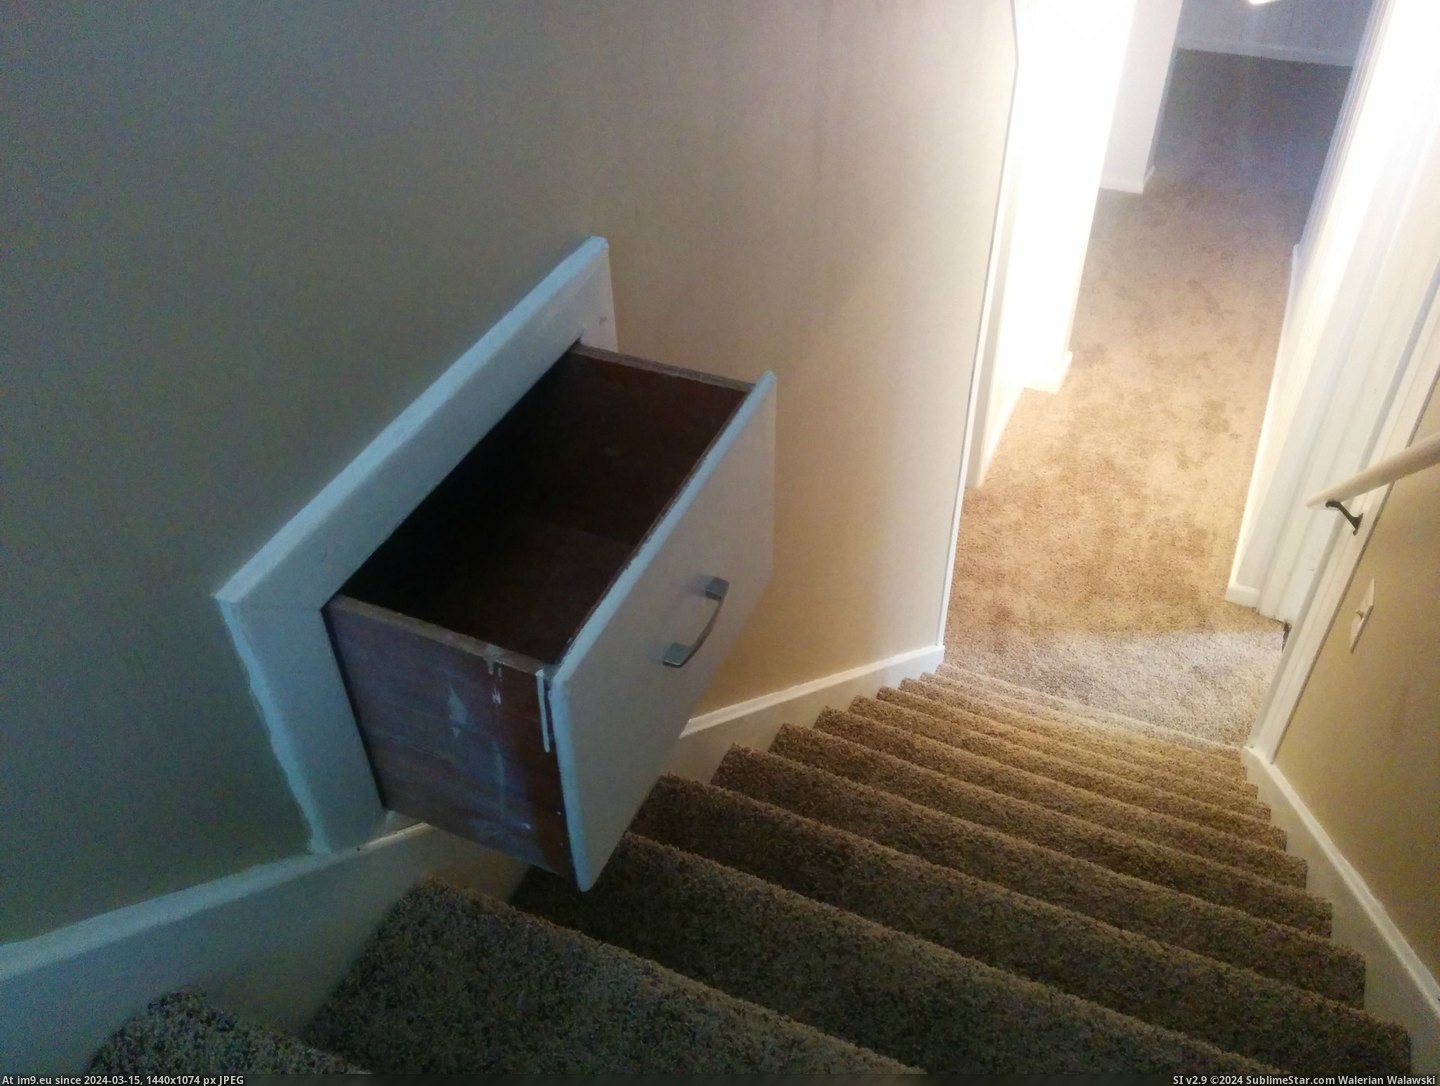 #House #Moving #Stairwell #Downstairs #Drawer [Mildlyinteresting] The house I'm moving into has a drawer in the downstairs stairwell Pic. (Image of album My r/MILDLYINTERESTING favs))